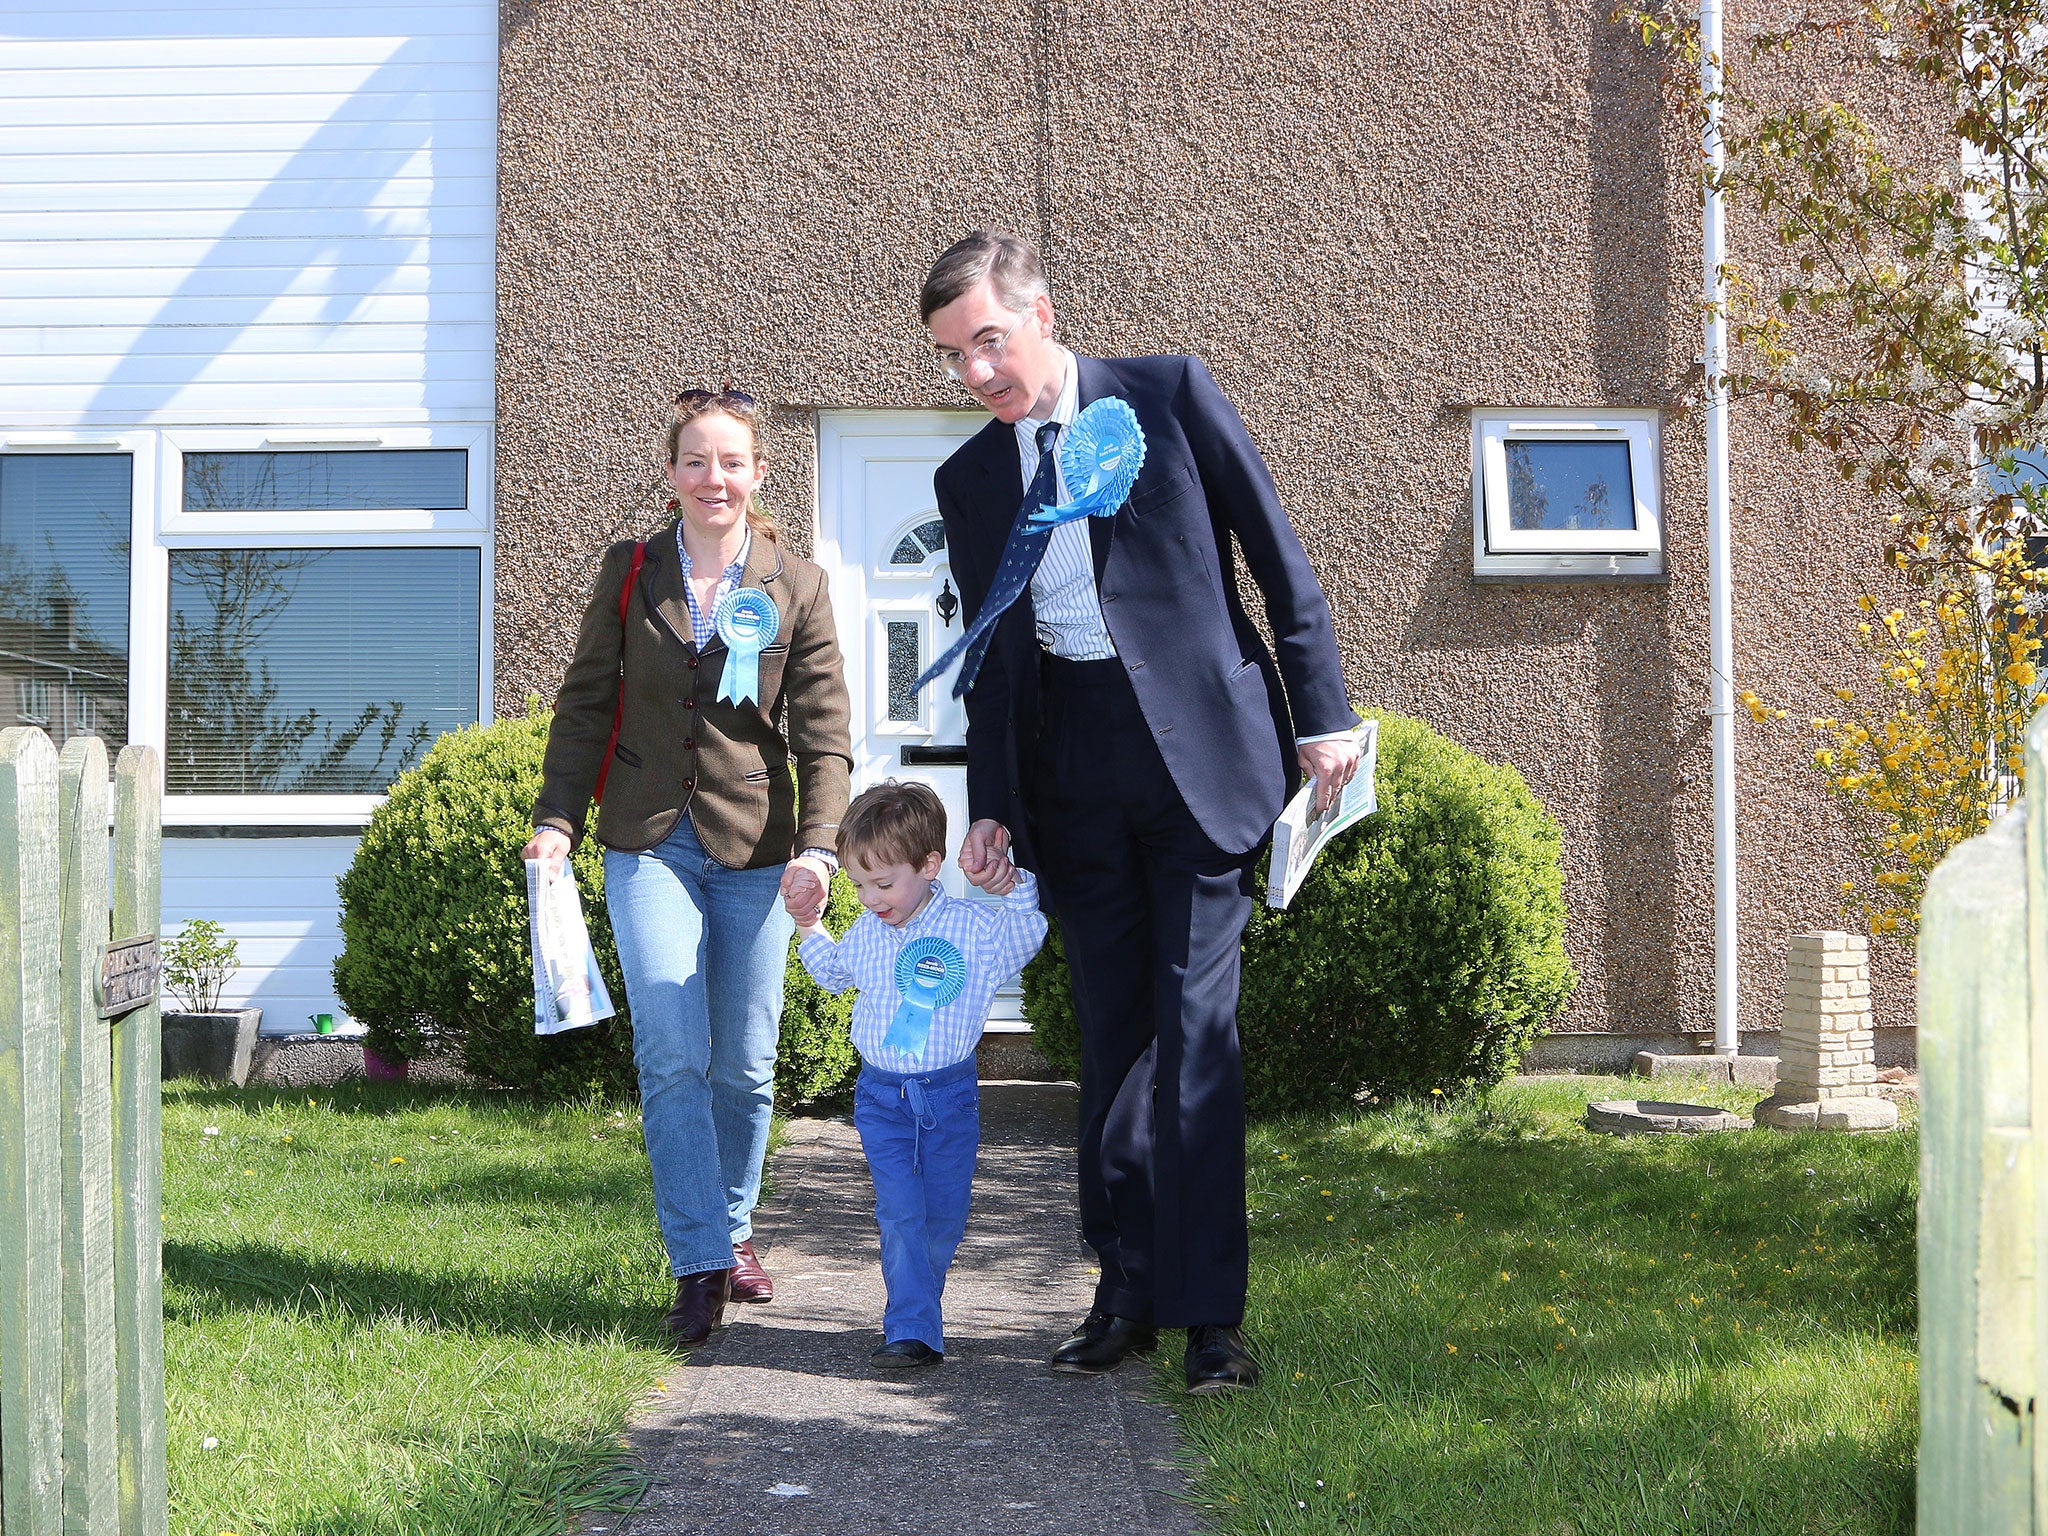 Jacob Rees-Mogg in Temple Cloud, with wife Helena and son Anselm providing support